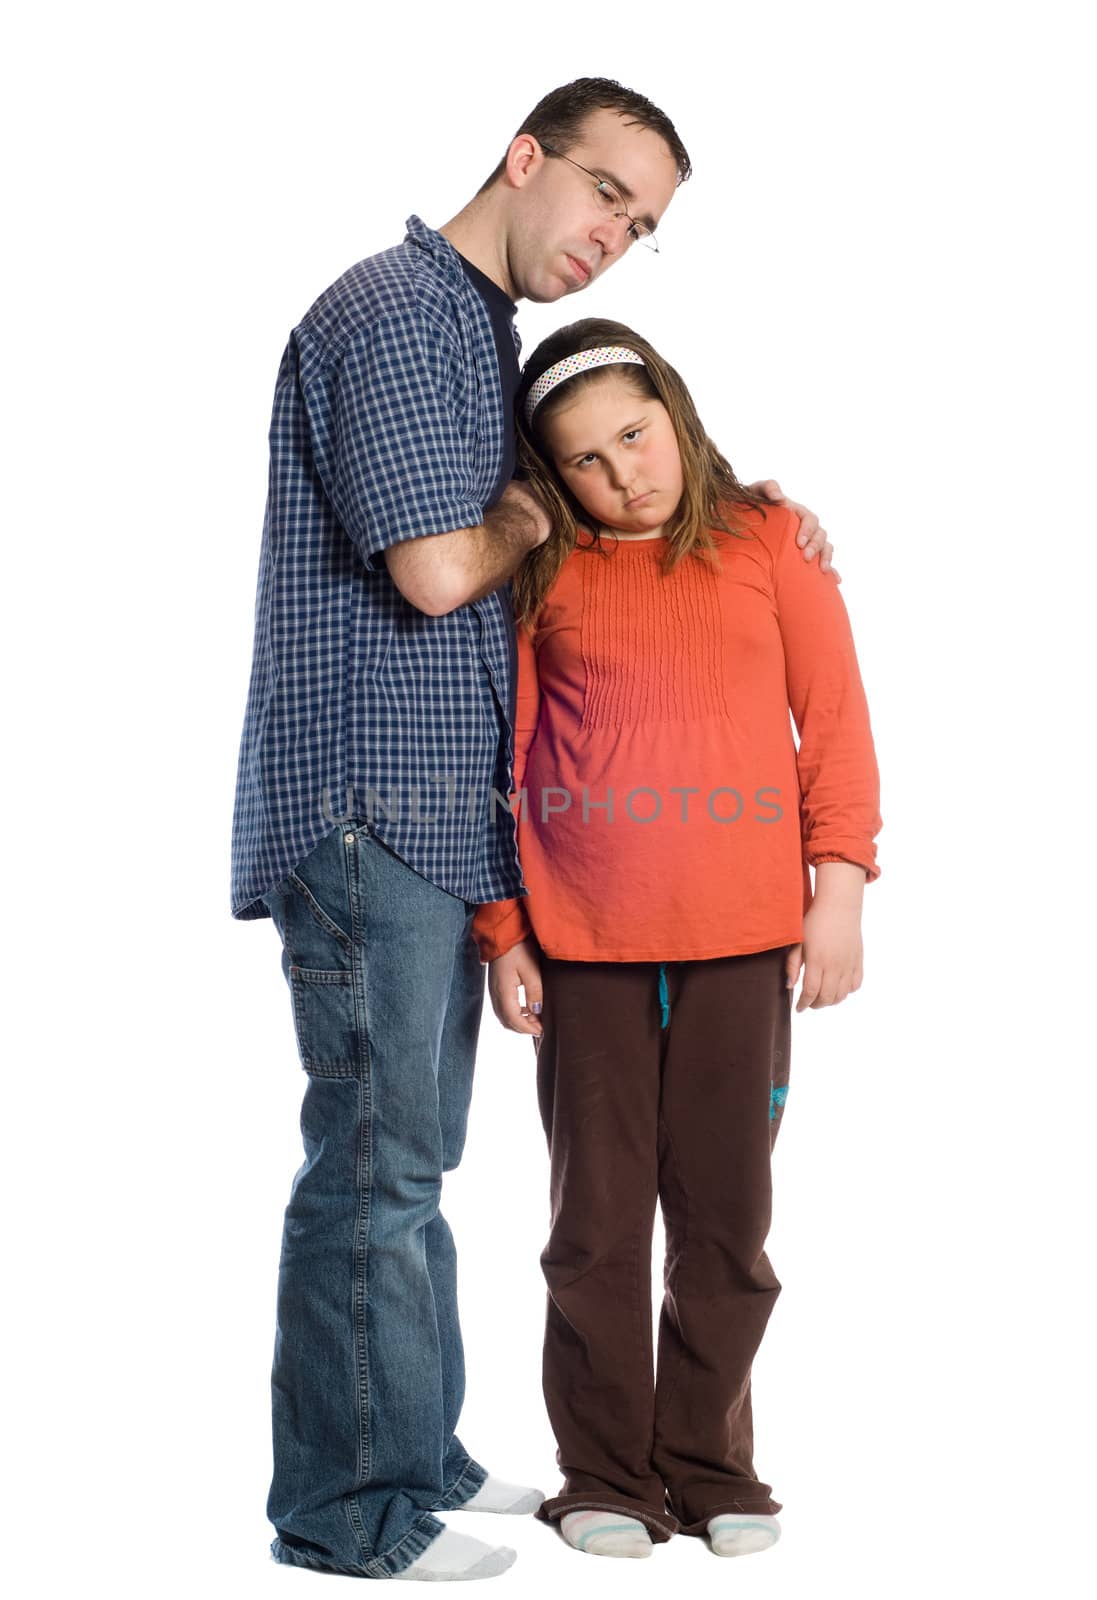 Full body view of a father comforting his daughter, isolated against a white background